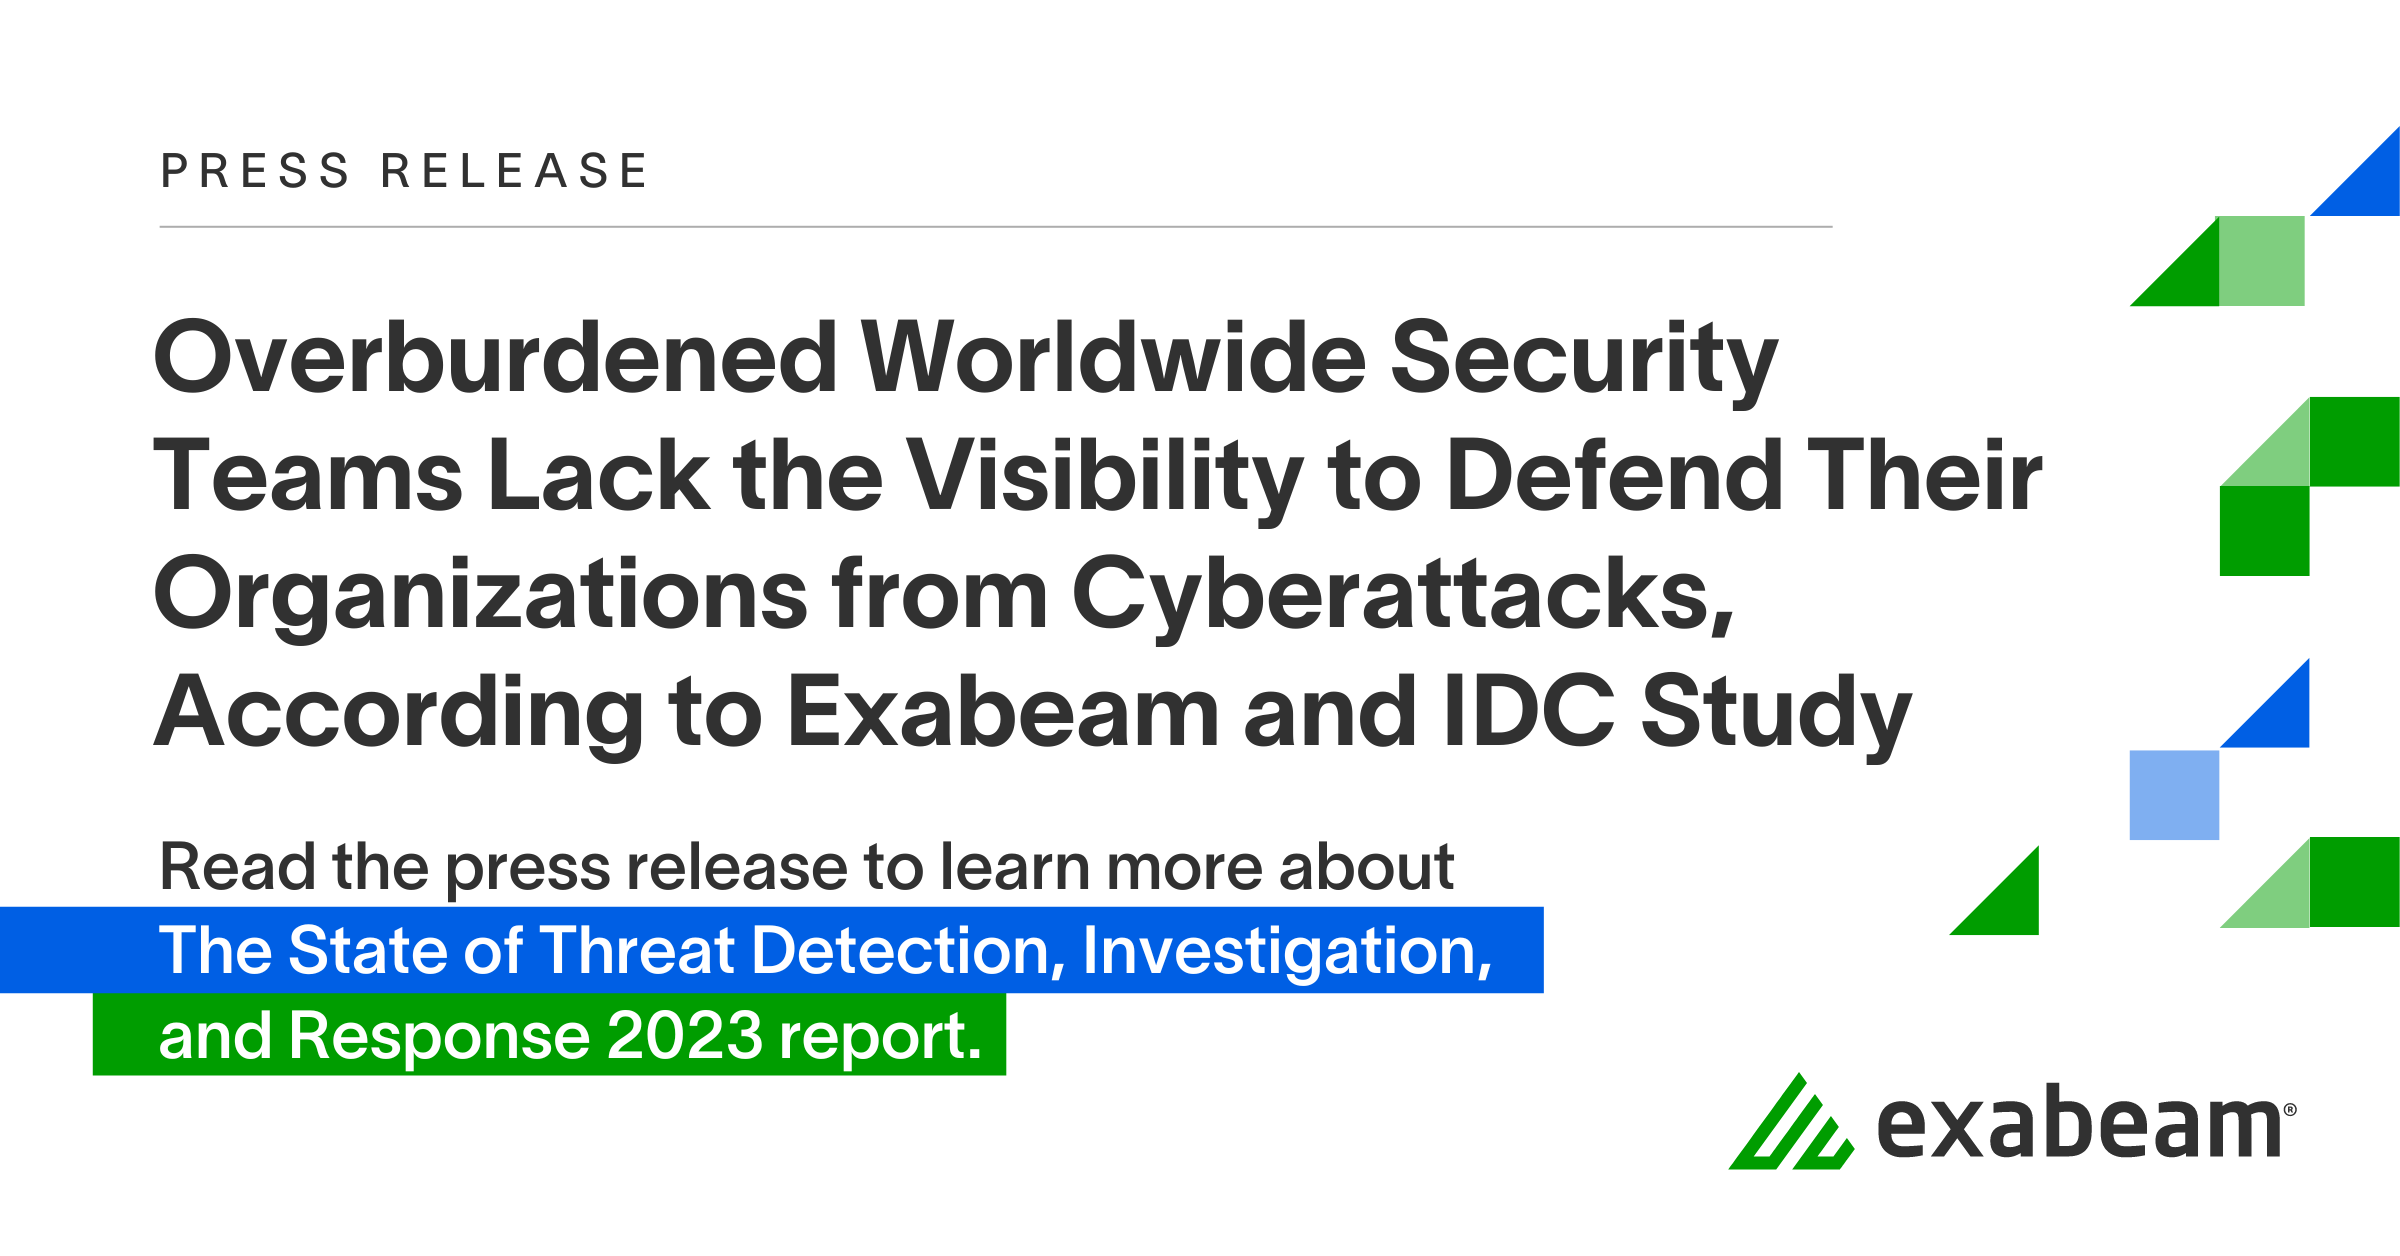 Overburdened Worldwide Security Teams Lack the Visibility to Defend Their Organizations from Cyberattacks, According to Exabeam and IDC Study